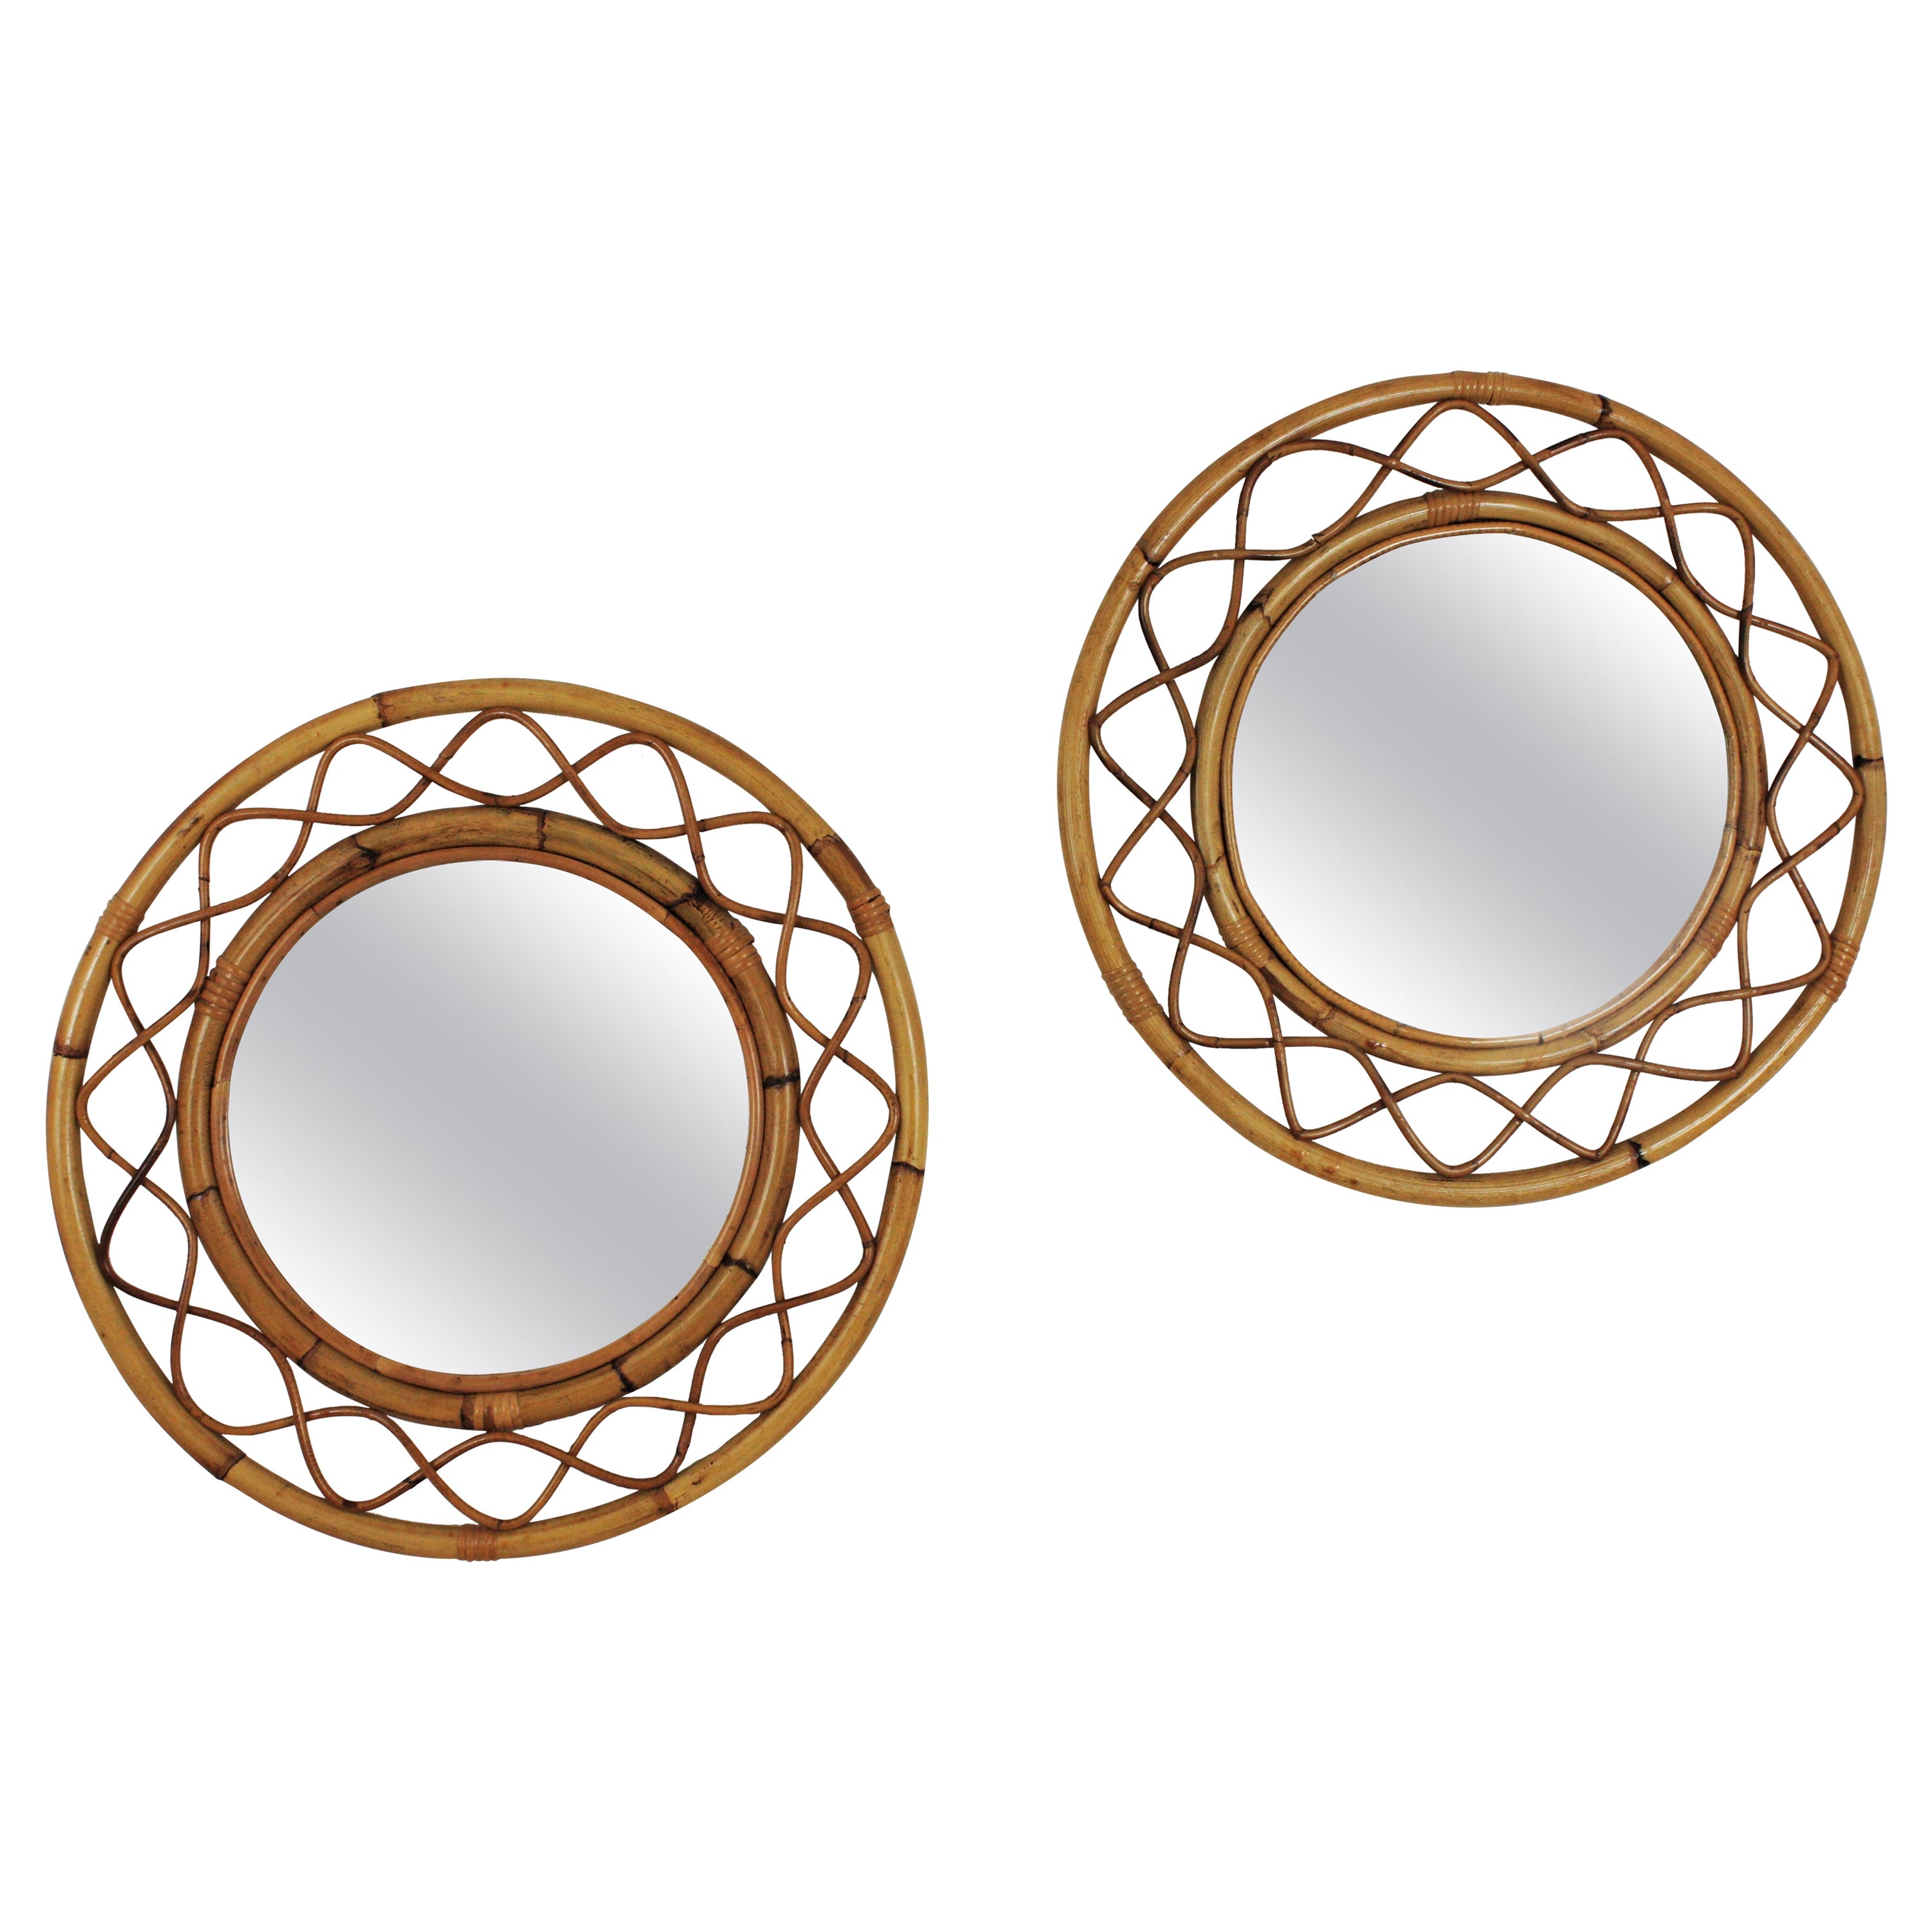 Pair of Rattan Bamboo Round Mirrors, Franco Albini Style For Sale